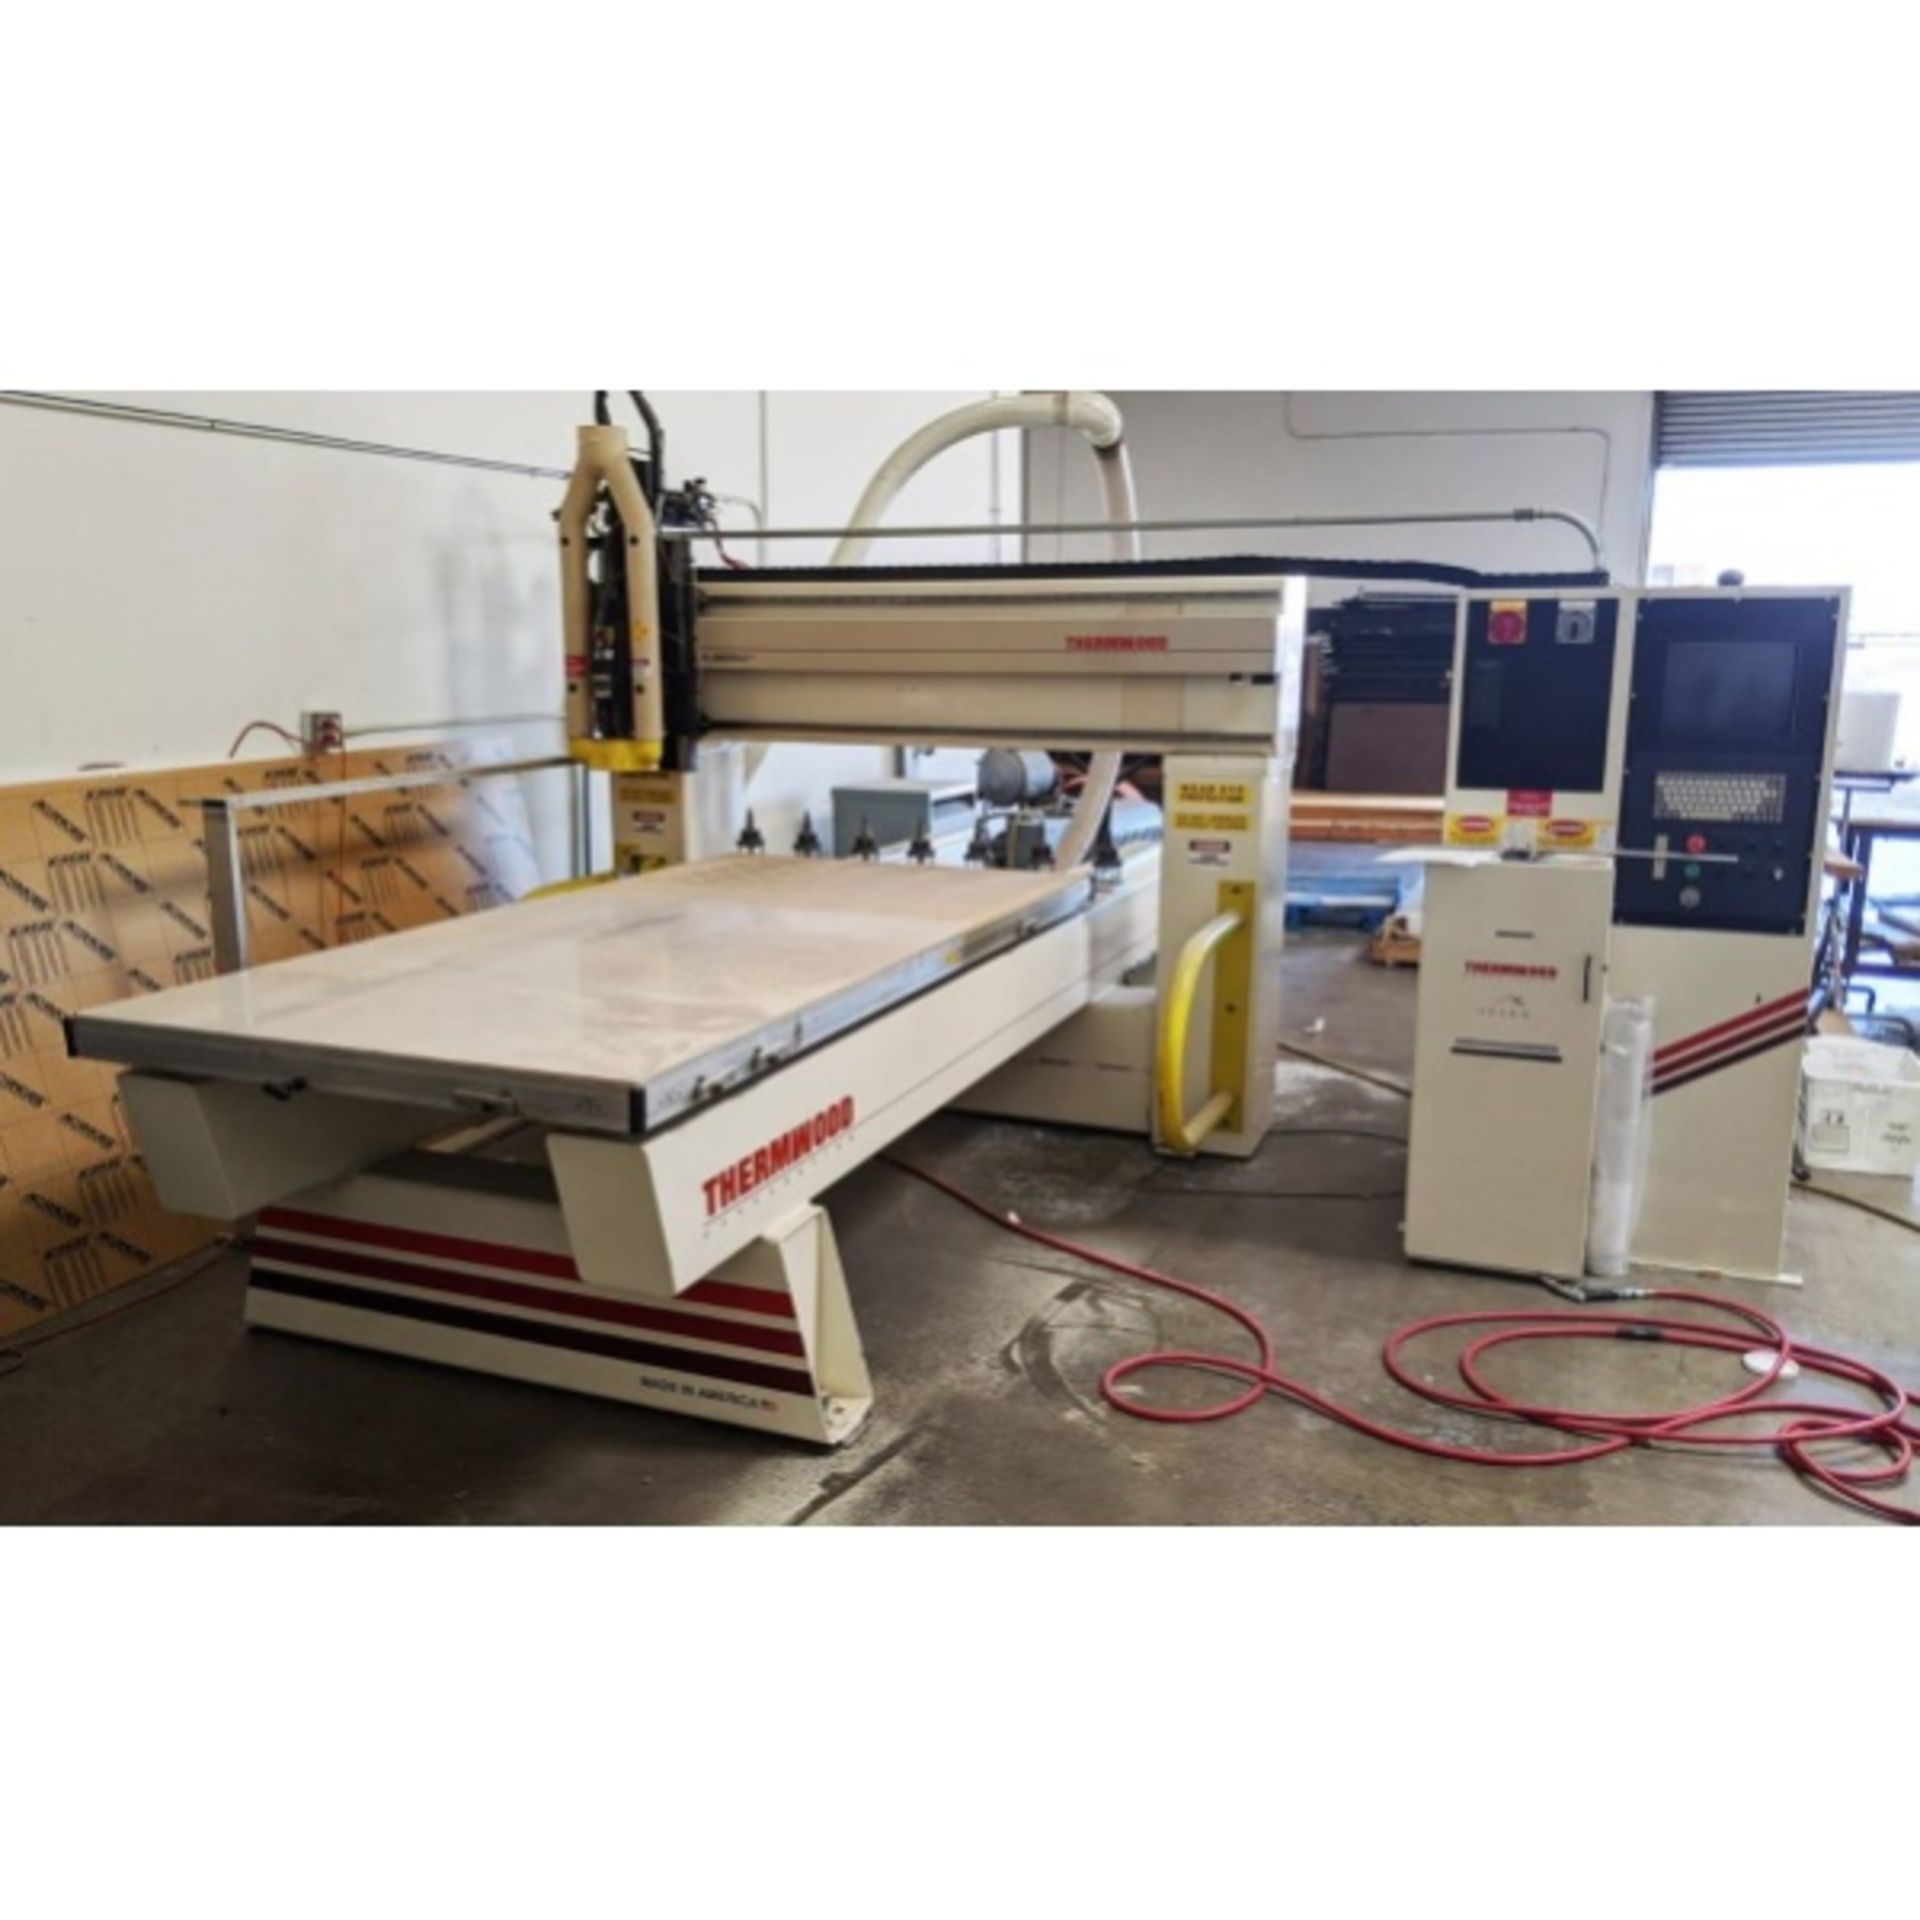 THERMWOOD MODEL CS40 3-AXIS CNC ROUTER - Image 2 of 6